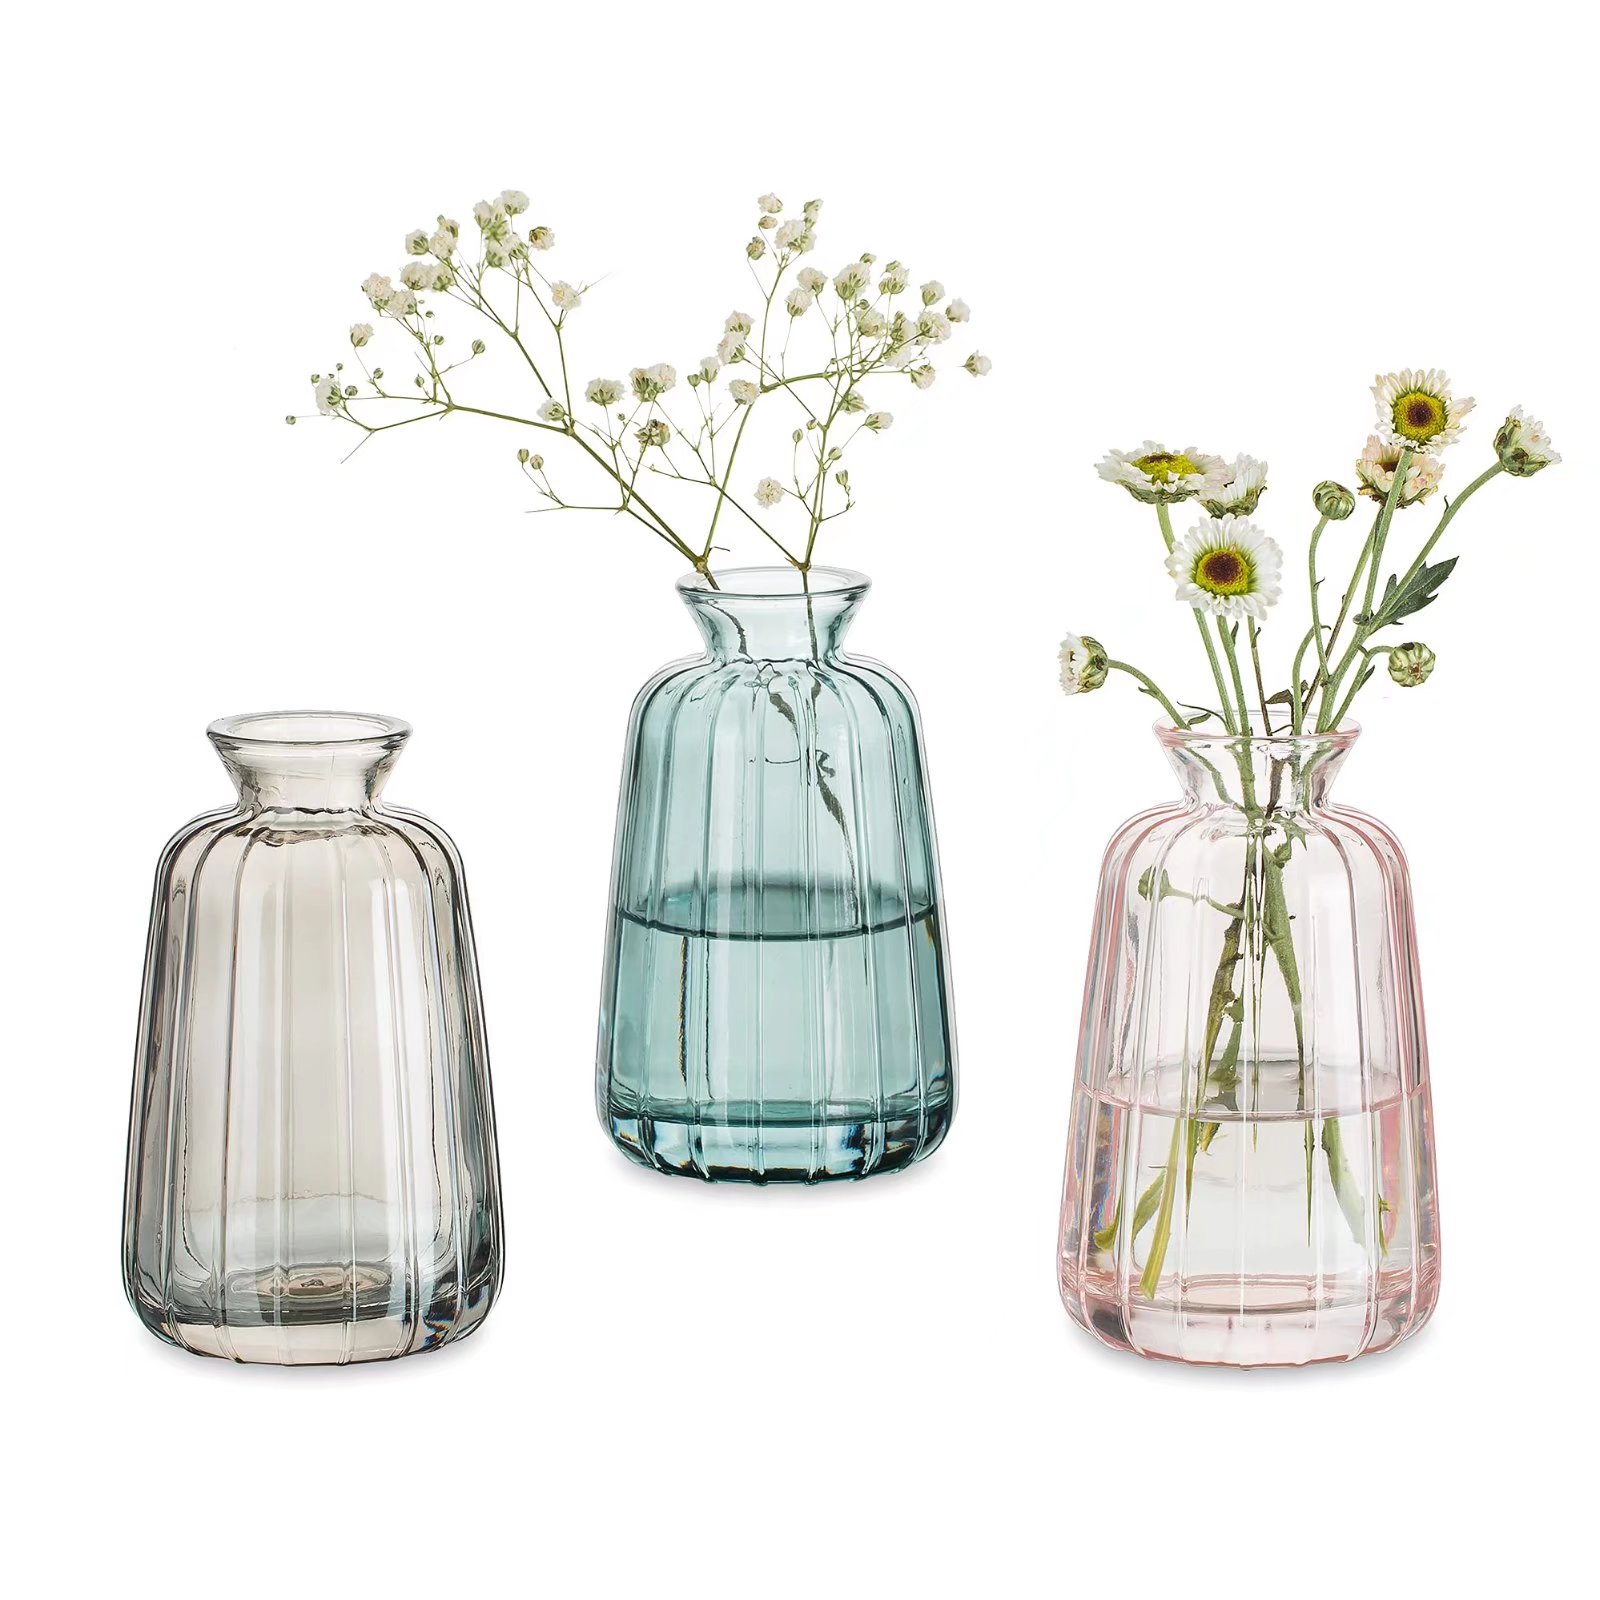 Mother's Gift Small Glass Bud Vase 4.52"Colorful Cute Ribbed Vases for Flowers Set of 3 (Pink+Grey+Green) - image 1 of 7